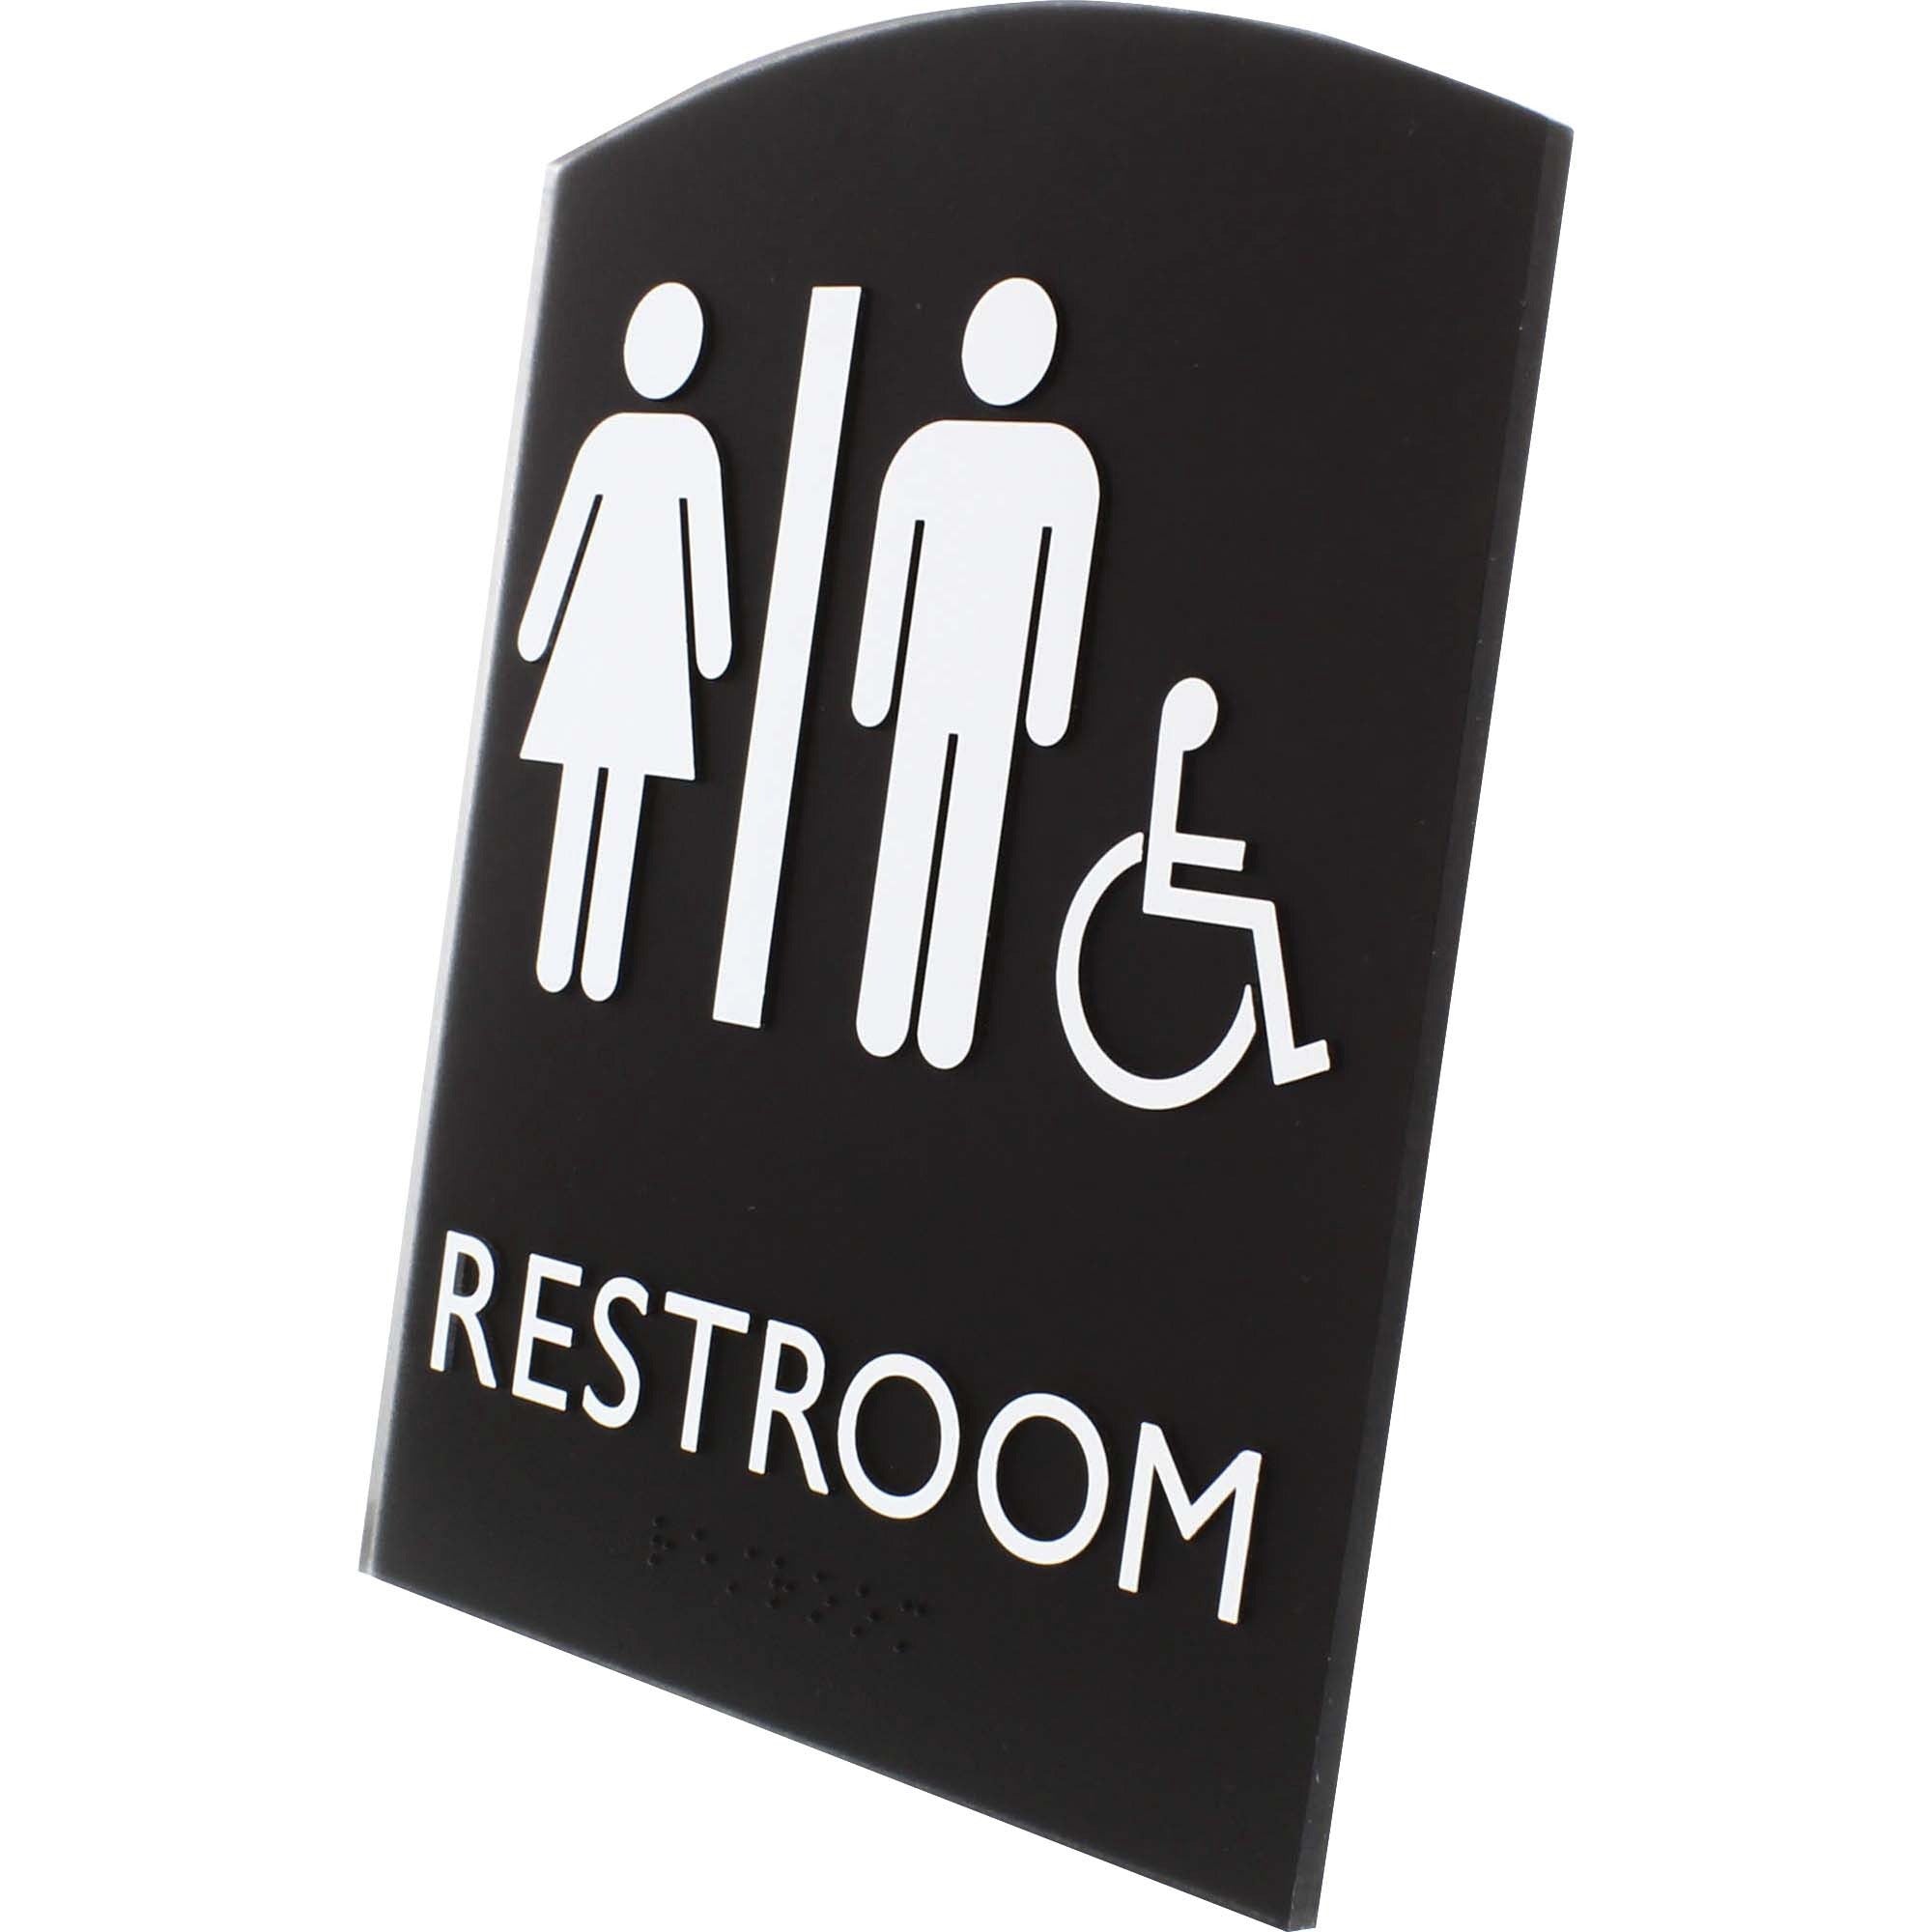 lorell-arched-unisex-handicap-restroom-sign-1-each-68-width-x-85-height-rectangular-shape-surface-mountable-easy-readability-braille-plastic-black_llr02673 - 2